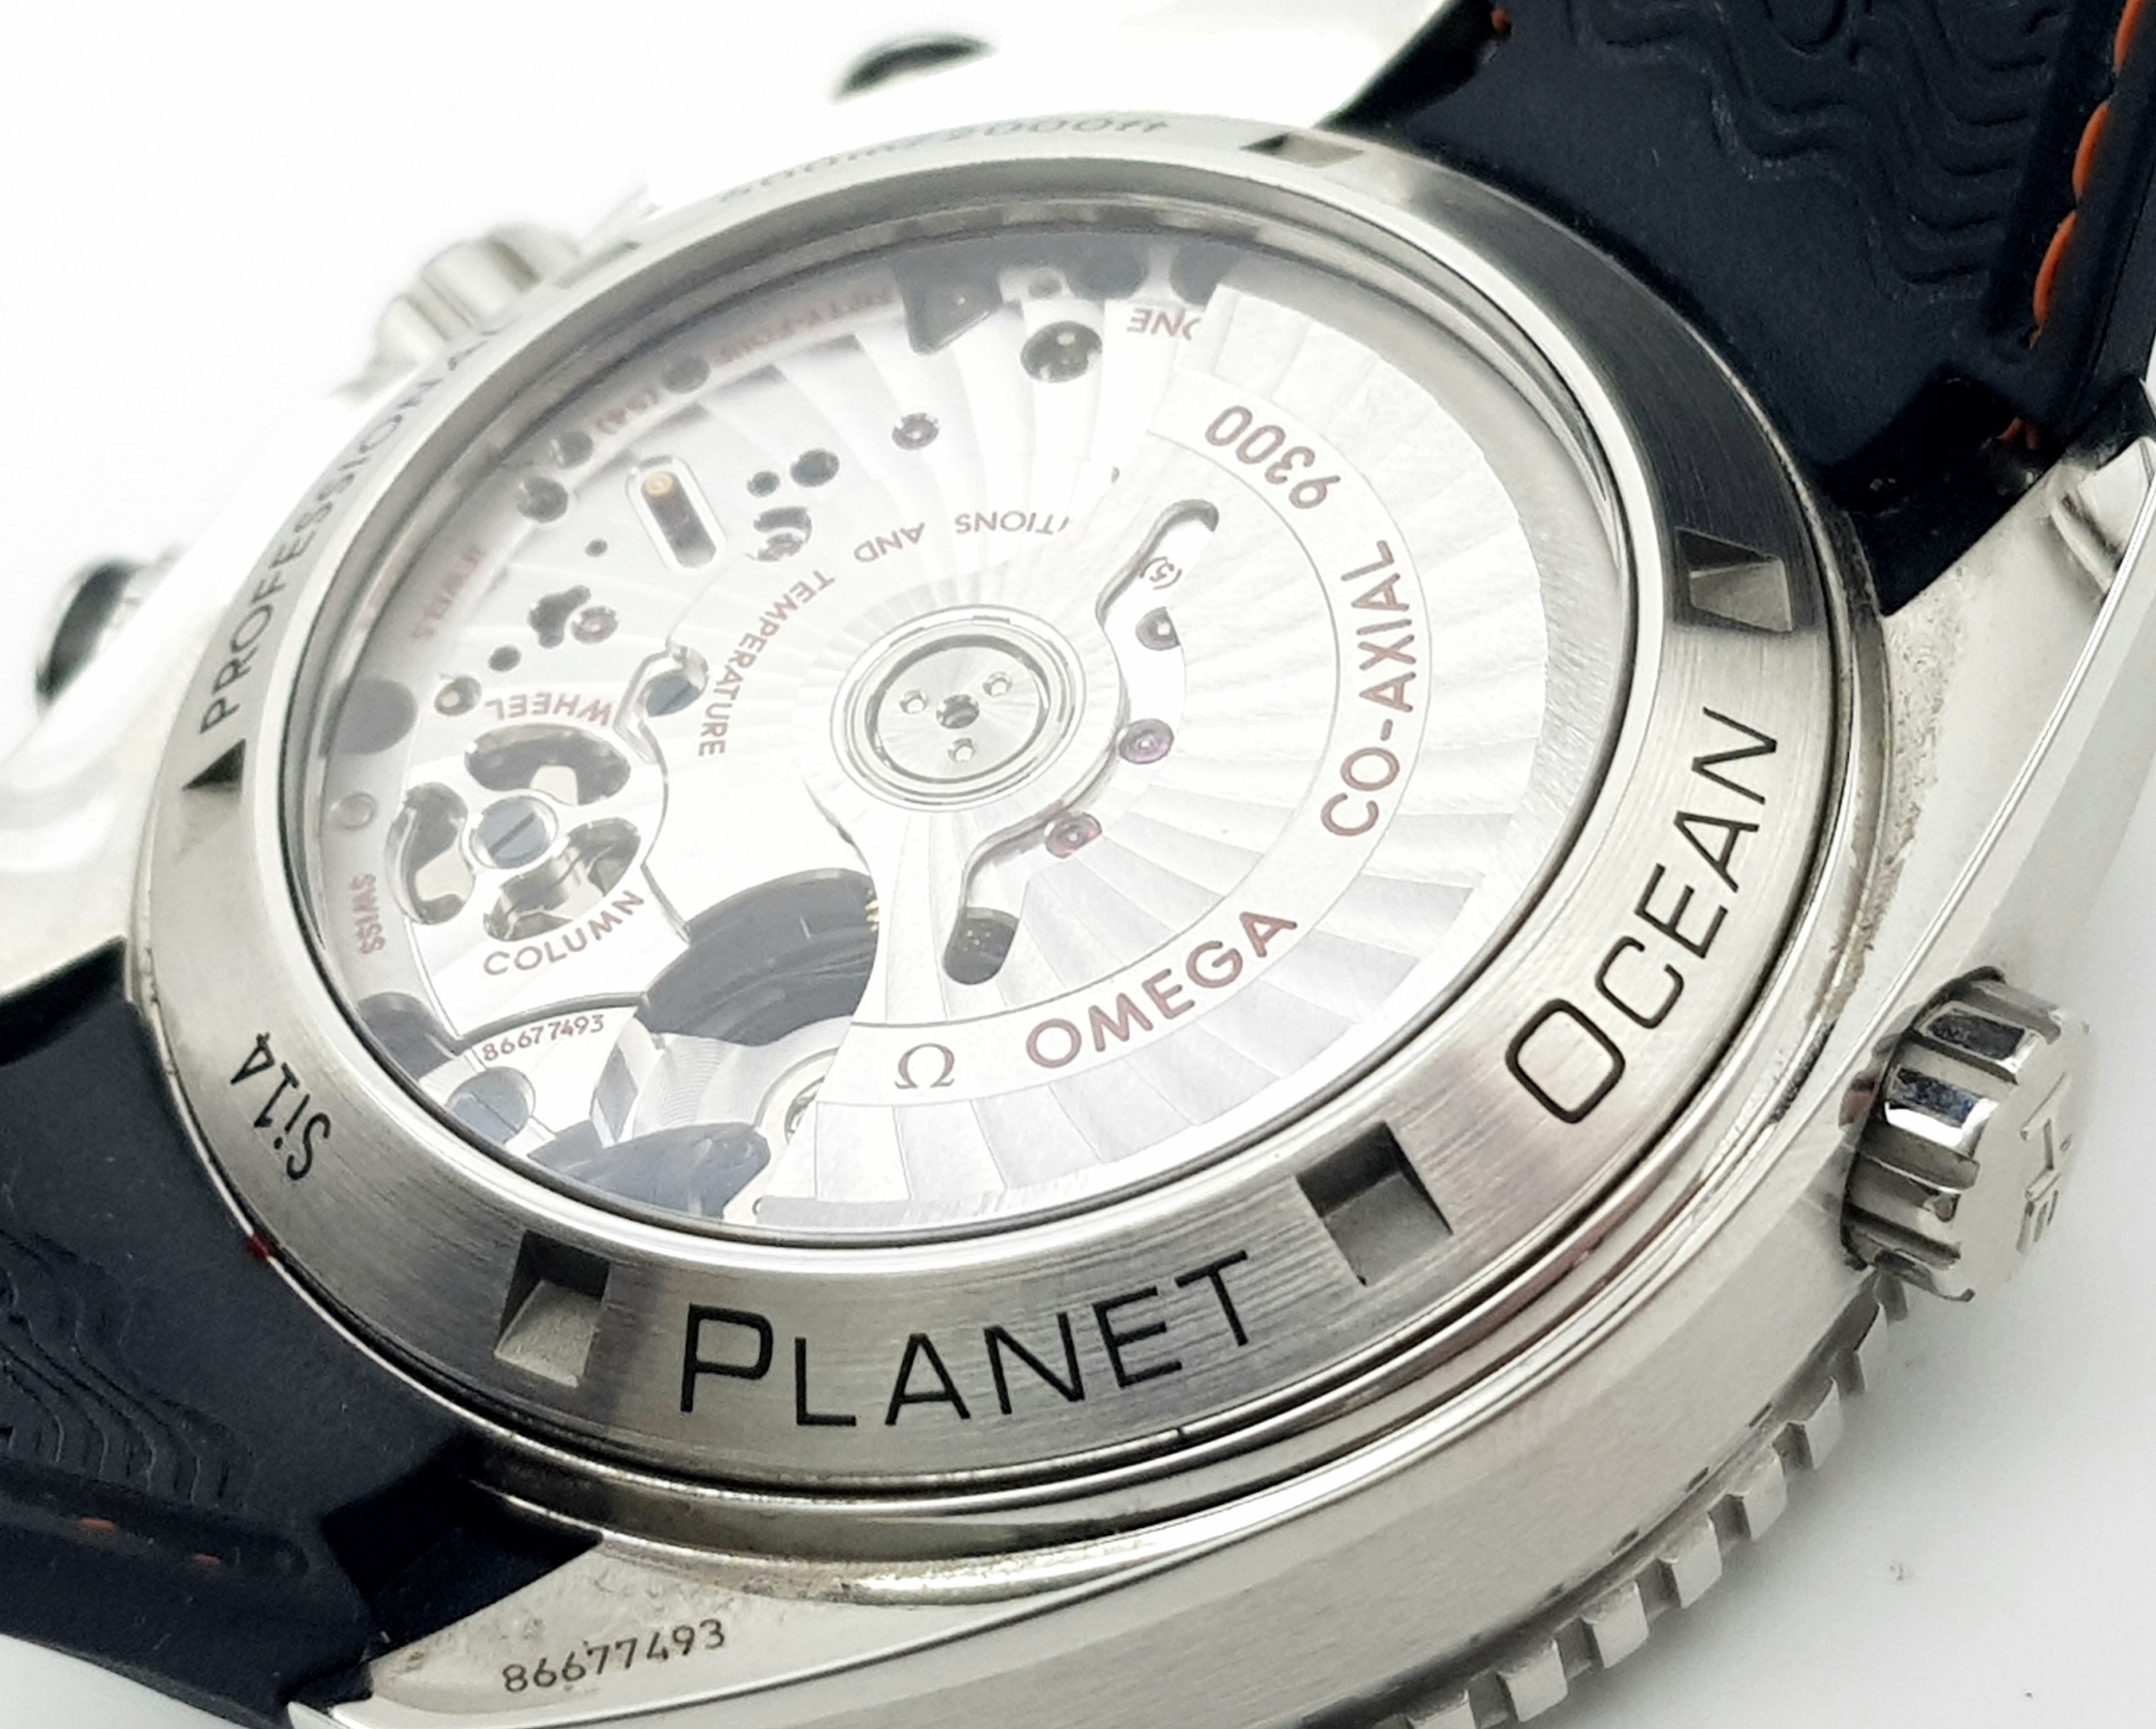 A FANTASTIC EXAMPLE OF AN OMEGA "SEAMASTER" PROFESSIONAL CO-AXIAL CHRONOMETER WITH 2000FT LIMIT . - Image 8 of 8